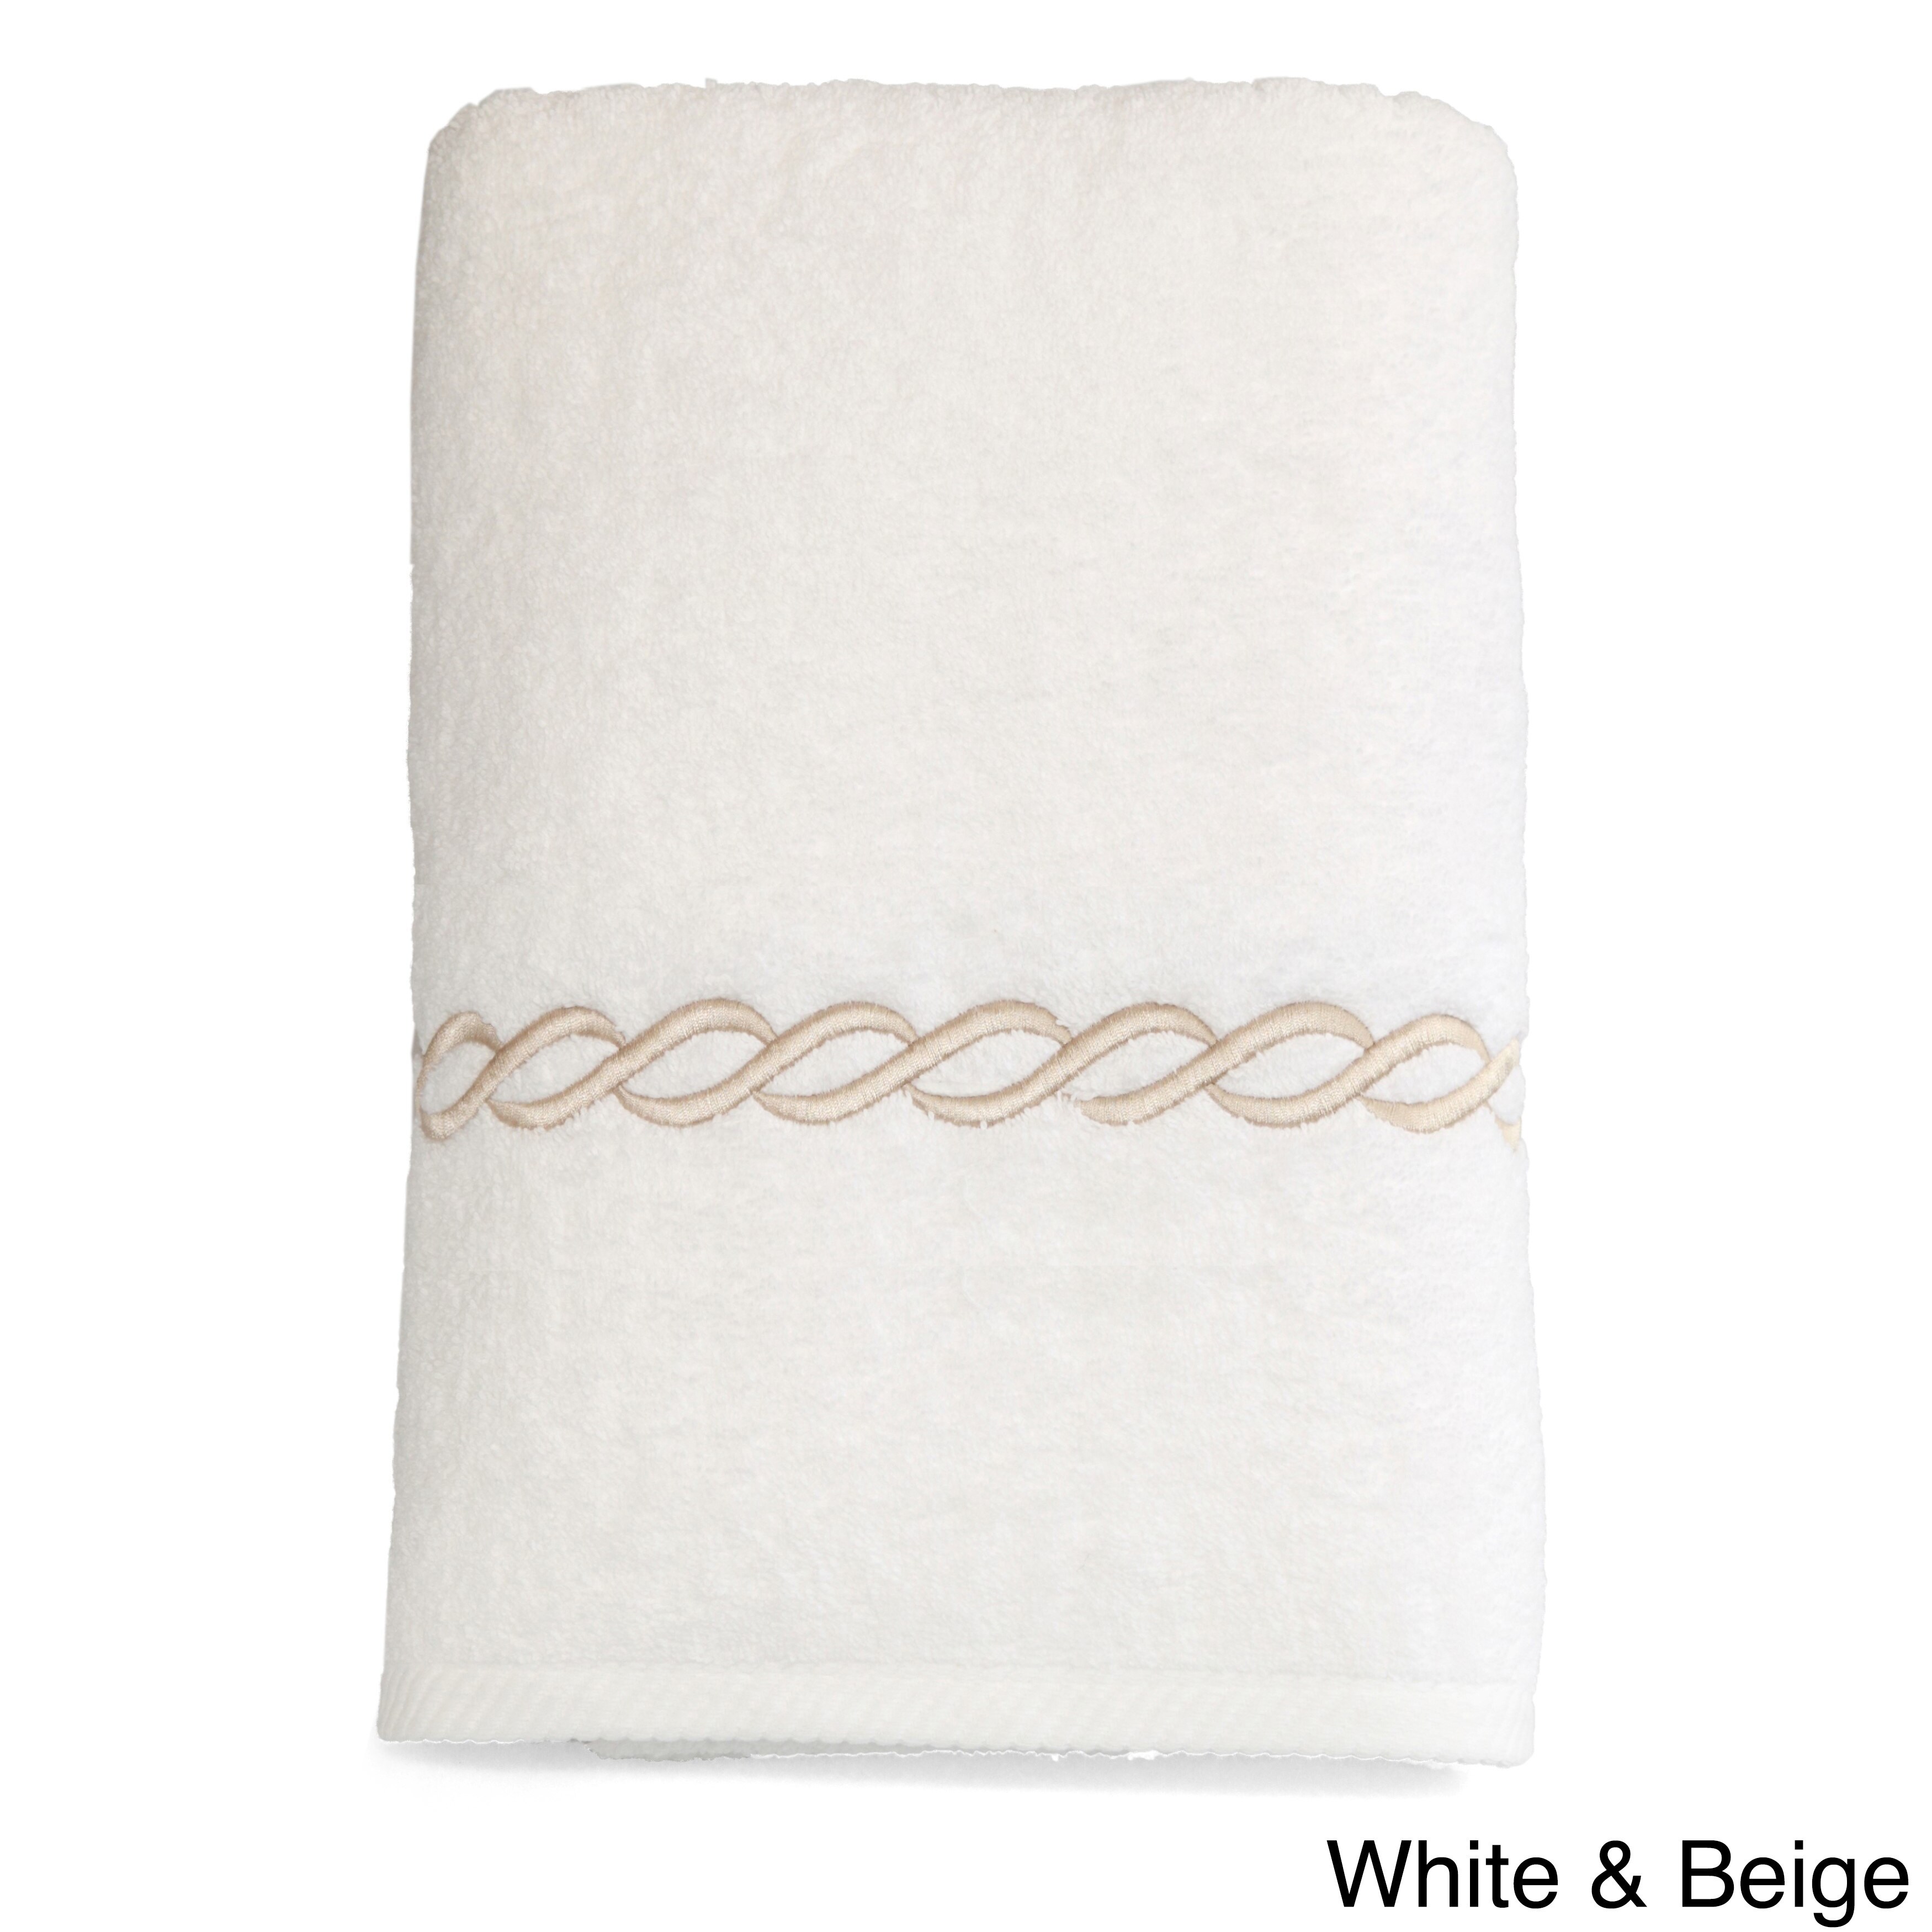 https://ak1.ostkcdn.com/images/products/9535195/Authentic-Hotel-and-Spa-Embroidered-Link-Turkish-Cotton-Bath-Towel-b3378621-4481-49a8-b899-5f1a5bbfdd60.jpg